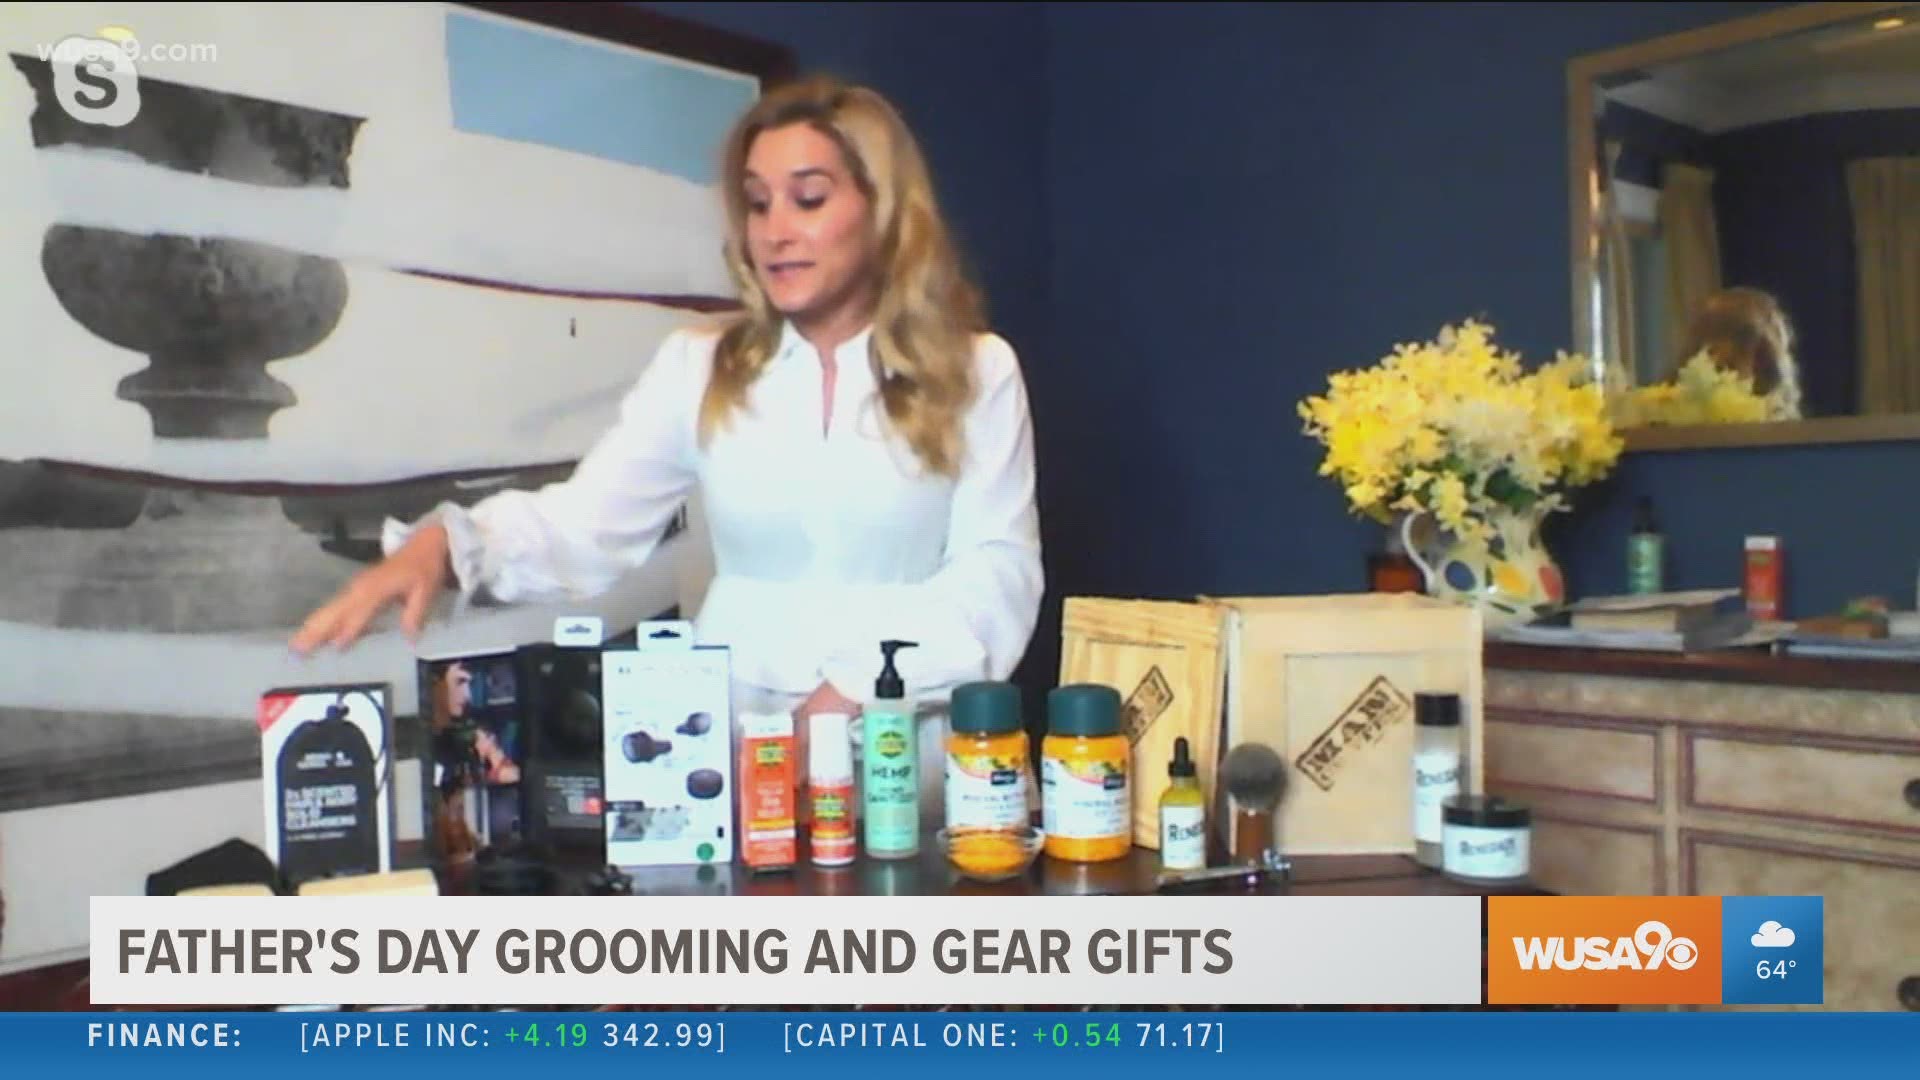 Style and trend expert Brittney Levine has the perfect grooming products you can gift your dad for Father's Day